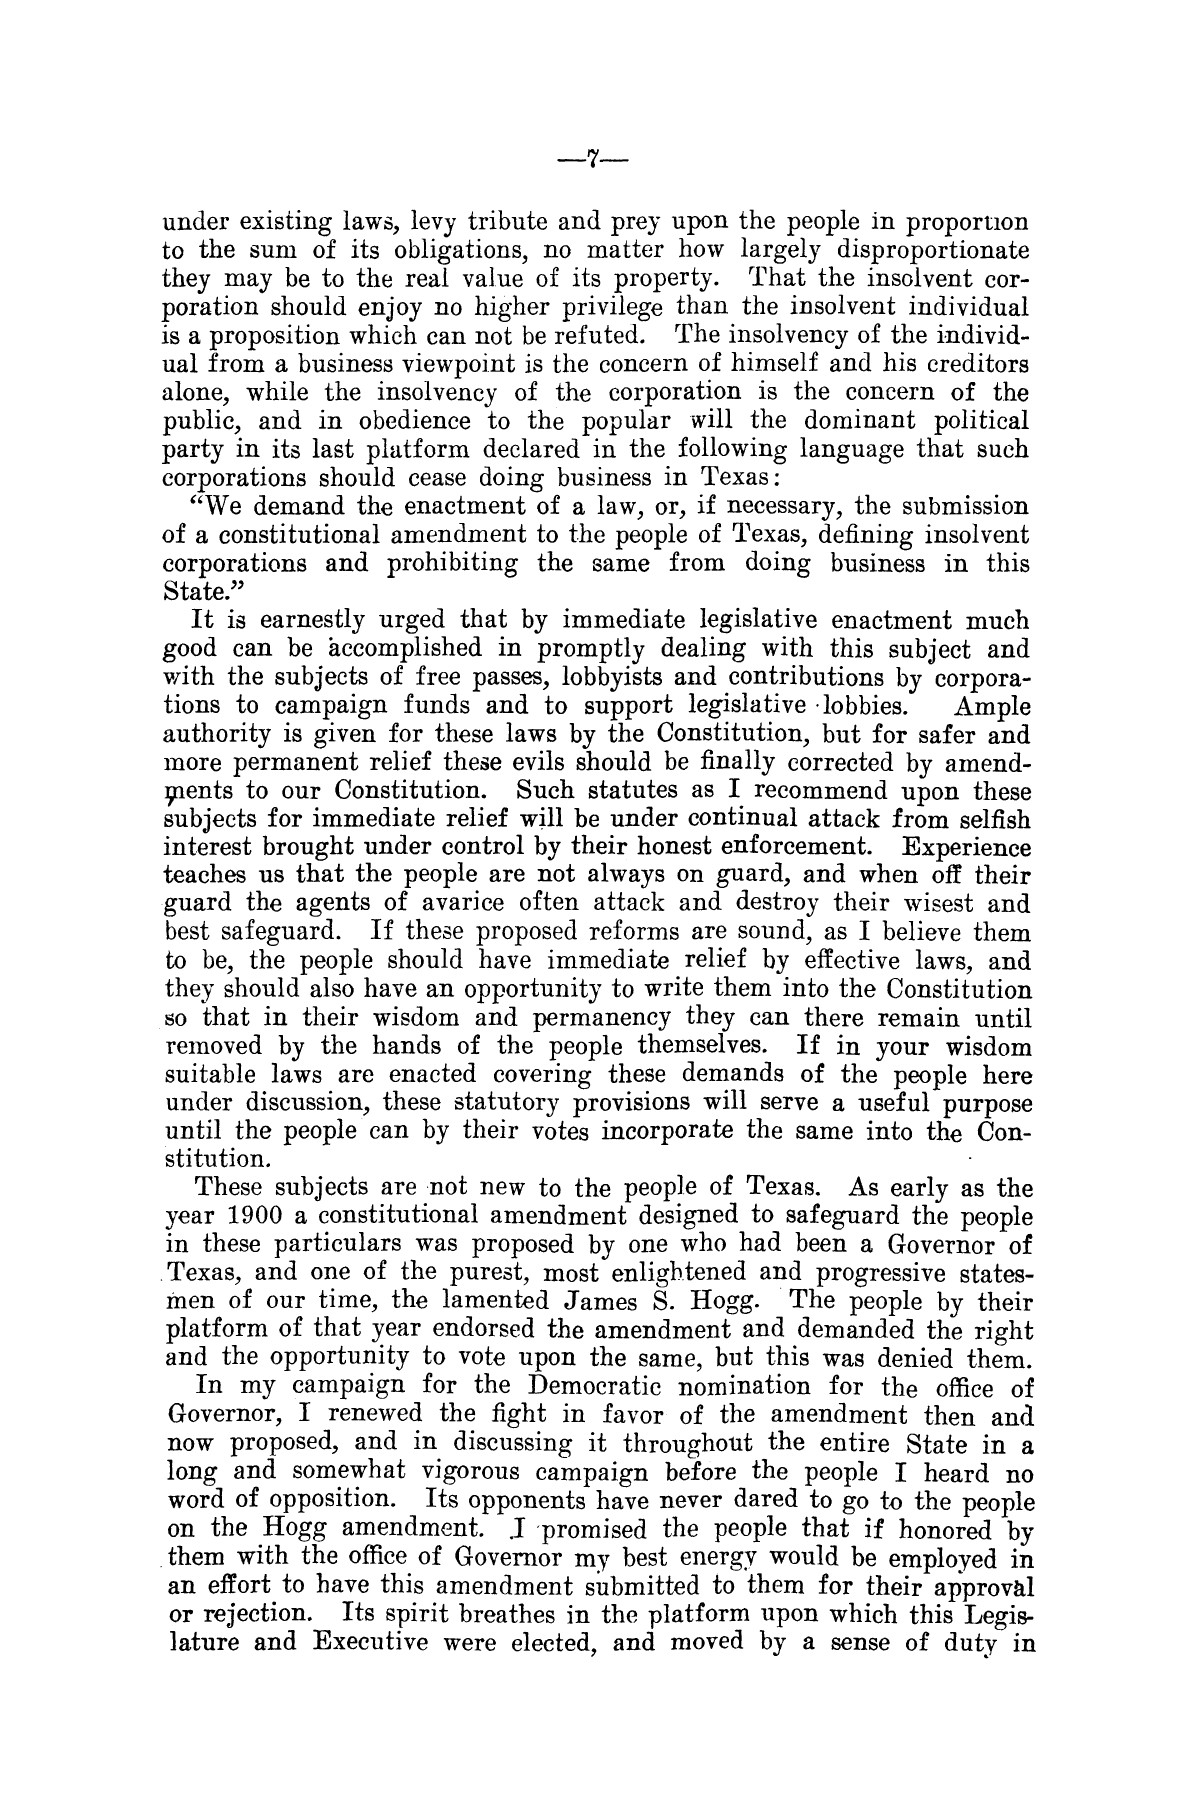 Message of Governor T.M. Campbell to the thirtieth legislature of Texas, to which is appended the State Democratic Platform adopted at Dallas, Texas, August 13, 1906.
                                                
                                                    [Sequence #]: 7 of 27
                                                